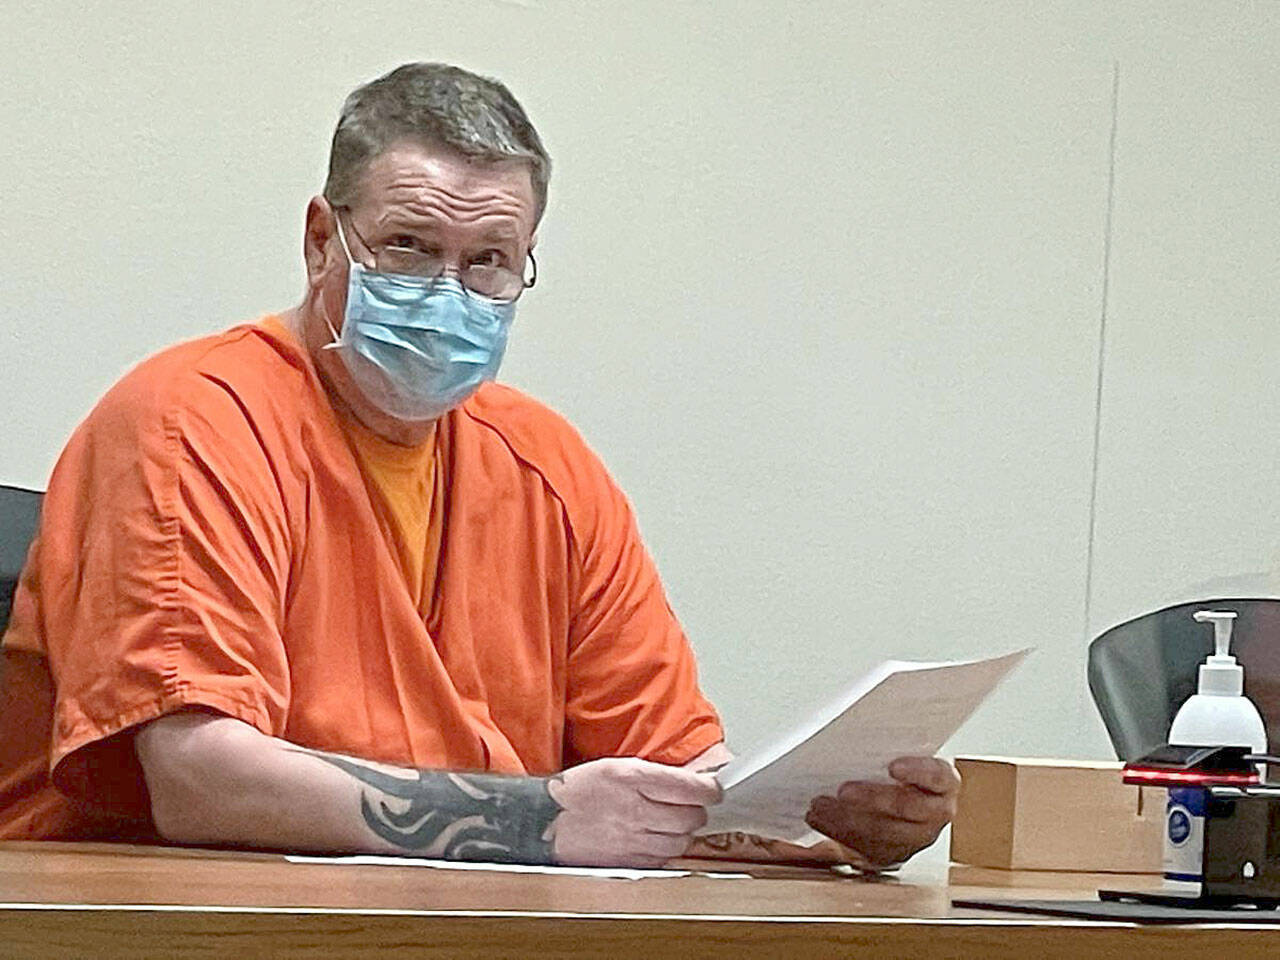 Dennis Bauer, charged with three counts of aggravated first-degree murder, is pictured at an Aug. 17 Clallam County Superior Court hearing. (Paul Gottlieb/Peninsula Daily News)